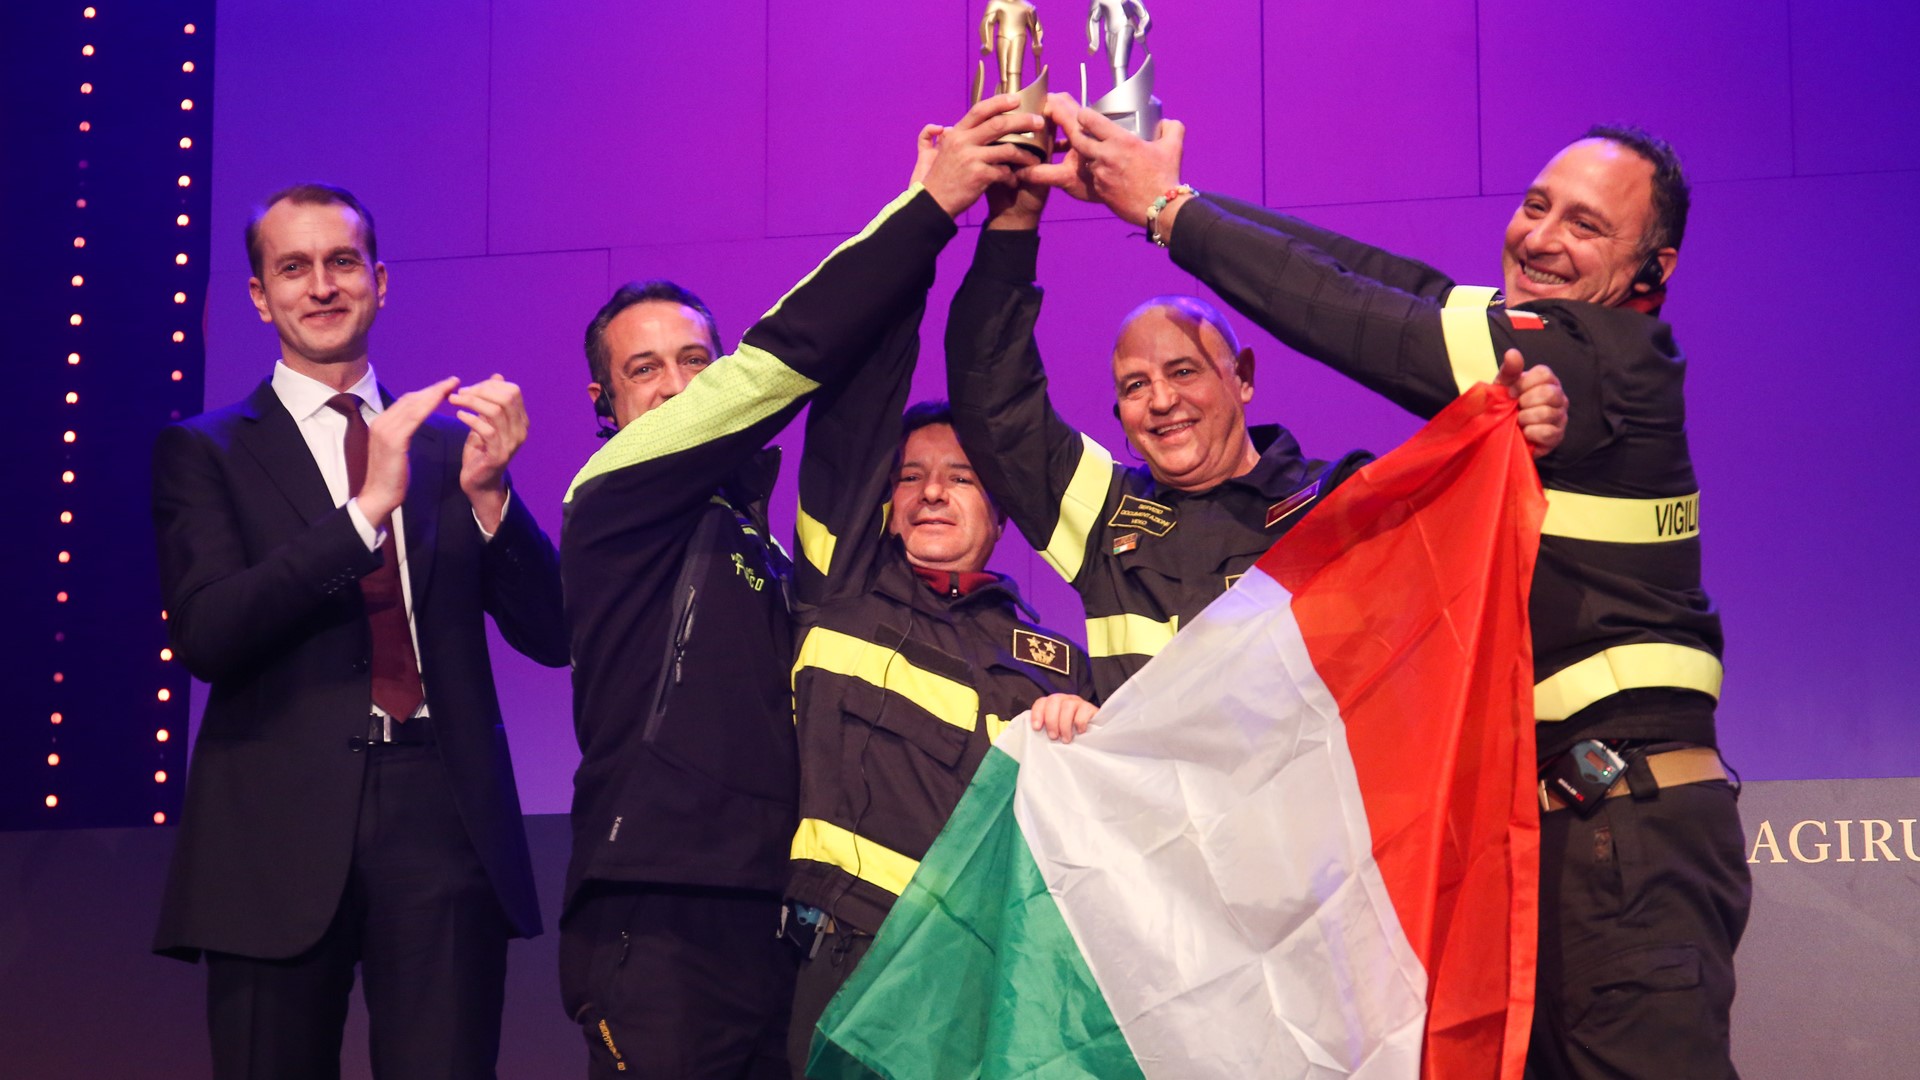 Marc Diening, CEO of Magirus (far left), with the Firefighting Team of the Year 2016